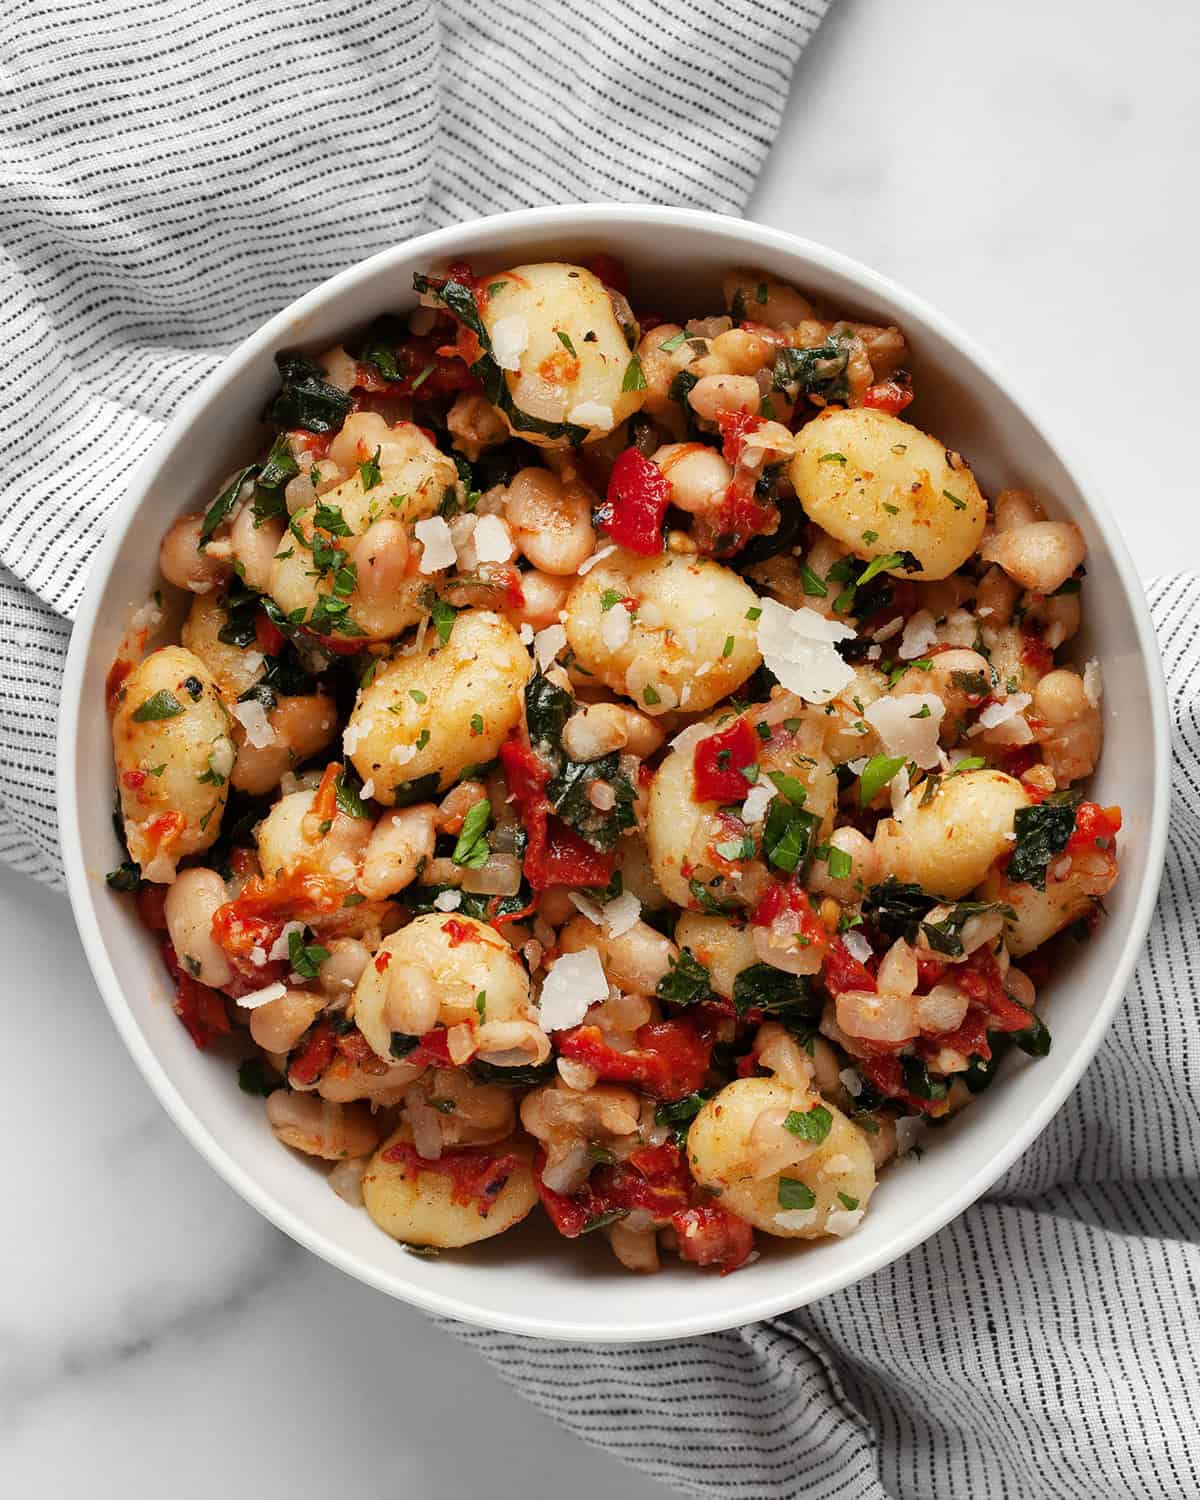 Skillet gnocchi with roasted red peppers, white beans and kale in a bowl.